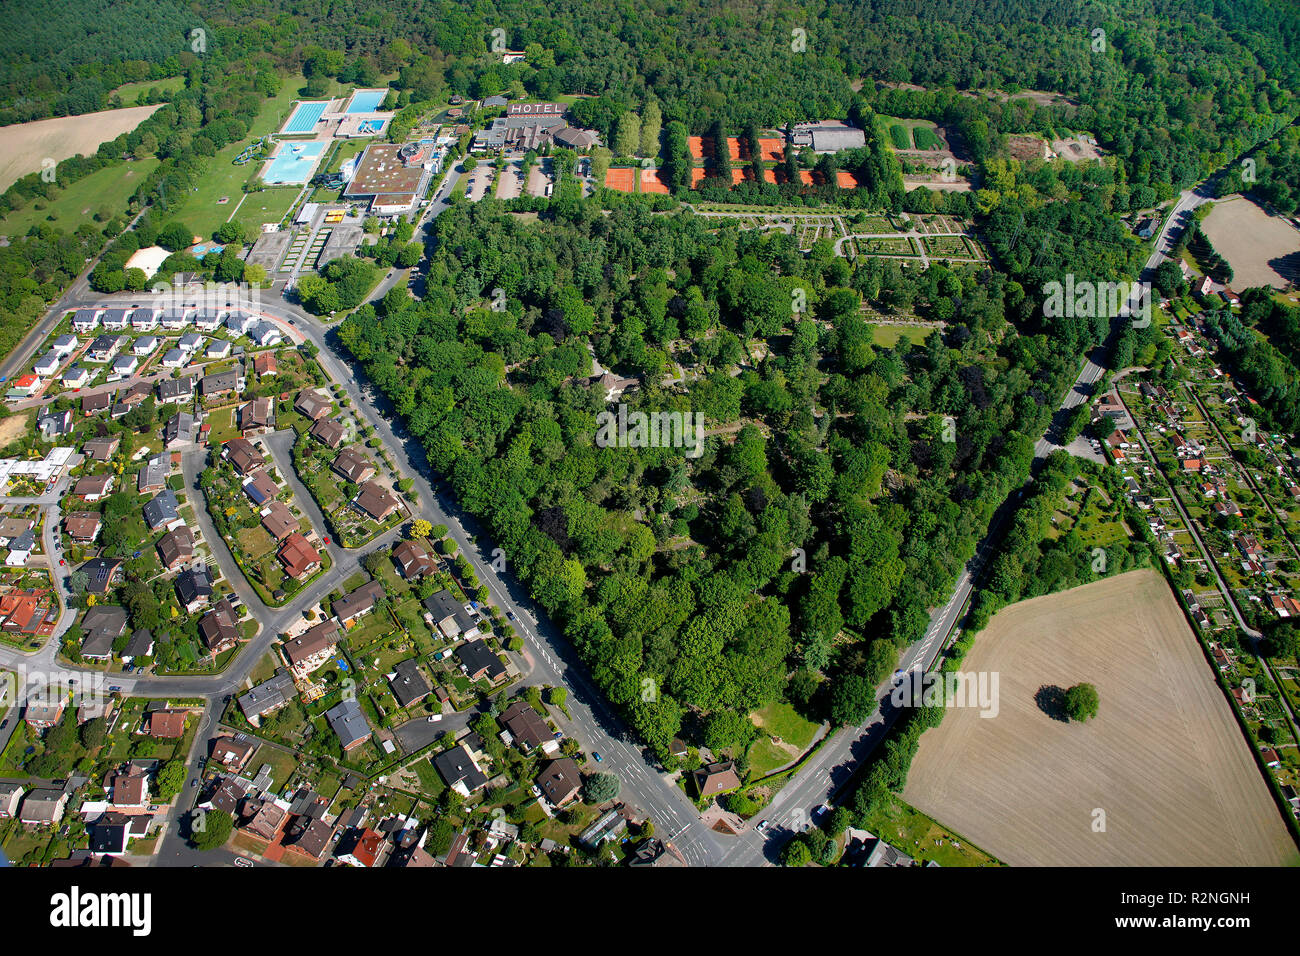 Hotel with the TUS tennis courts and Maritimo, Stimbergparkhotel, Oer-Erkenschwick, Ruhr area, North Rhine-Westphalia, Germany, Europe, Stock Photo